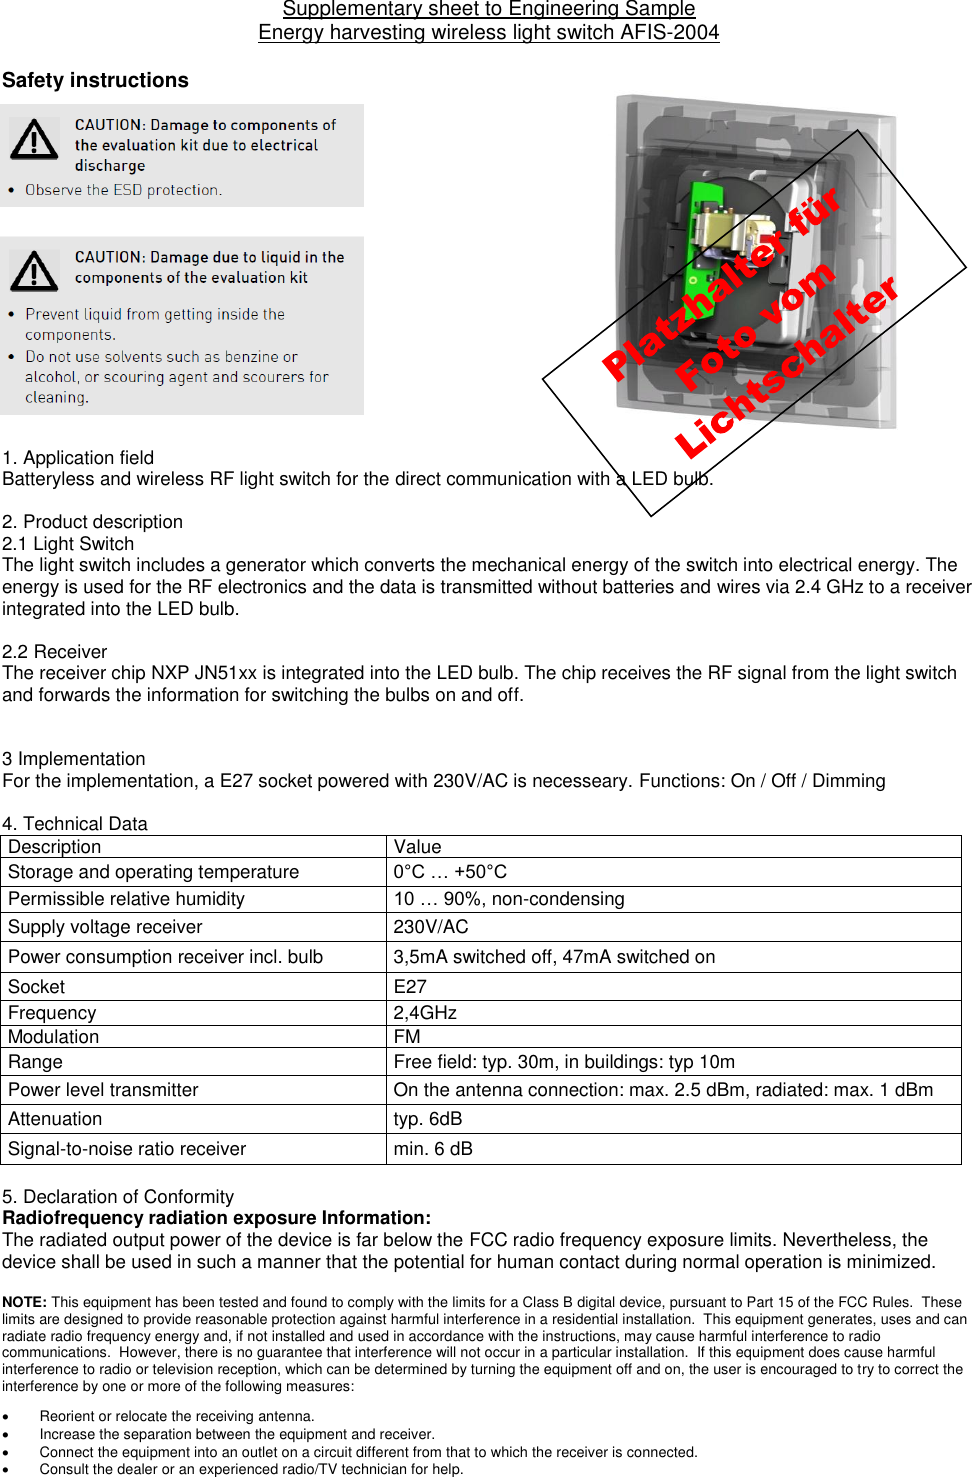 Supplementary sheet to Engineering Sample  Energy harvesting wireless light switch AFIS-2004  Safety instructions                1. Application field  Batteryless and wireless RF light switch for the direct communication with a LED bulb.     2. Product description 2.1 Light Switch  The light switch includes a generator which converts the mechanical energy of the switch into electrical energy. The energy is used for the RF electronics and the data is transmitted without batteries and wires via 2.4 GHz to a receiver integrated into the LED bulb.   2.2 Receiver  The receiver chip NXP JN51xx is integrated into the LED bulb. The chip receives the RF signal from the light switch and forwards the information for switching the bulbs on and off.     3 Implementation For the implementation, a E27 socket powered with 230V/AC is necesseary. Functions: On / Off / Dimming  4. Technical Data  Description  Value Storage and operating temperature 0°C … +50°C Permissible relative humidity 10 … 90%, non-condensing Supply voltage receiver 230V/AC Power consumption receiver incl. bulb  3,5mA switched off, 47mA switched on Socket E27 Frequency  2,4GHz Modulation FM Range Free field: typ. 30m, in buildings: typ 10m Power level transmitter On the antenna connection: max. 2.5 dBm, radiated: max. 1 dBm Attenuation typ. 6dB Signal-to-noise ratio receiver min. 6 dB  5. Declaration of Conformity Radiofrequency radiation exposure Information: The radiated output power of the device is far below the FCC radio frequency exposure limits. Nevertheless, the device shall be used in such a manner that the potential for human contact during normal operation is minimized.  NOTE: This equipment has been tested and found to comply with the limits for a Class B digital device, pursuant to Part 15 of the FCC Rules.  These limits are designed to provide reasonable protection against harmful interference in a residential installation.  This equipment generates, uses and can radiate radio frequency energy and, if not installed and used in accordance with the instructions, may cause harmful interference to radio communications.  However, there is no guarantee that interference will not occur in a particular installation.  If this equipment does cause harmful interference to radio or television reception, which can be determined by turning the equipment off and on, the user is encouraged to try to correct the interference by one or more of the following measures:   Reorient or relocate the receiving antenna.   Increase the separation between the equipment and receiver.   Connect the equipment into an outlet on a circuit different from that to which the receiver is connected.   Consult the dealer or an experienced radio/TV technician for help.  